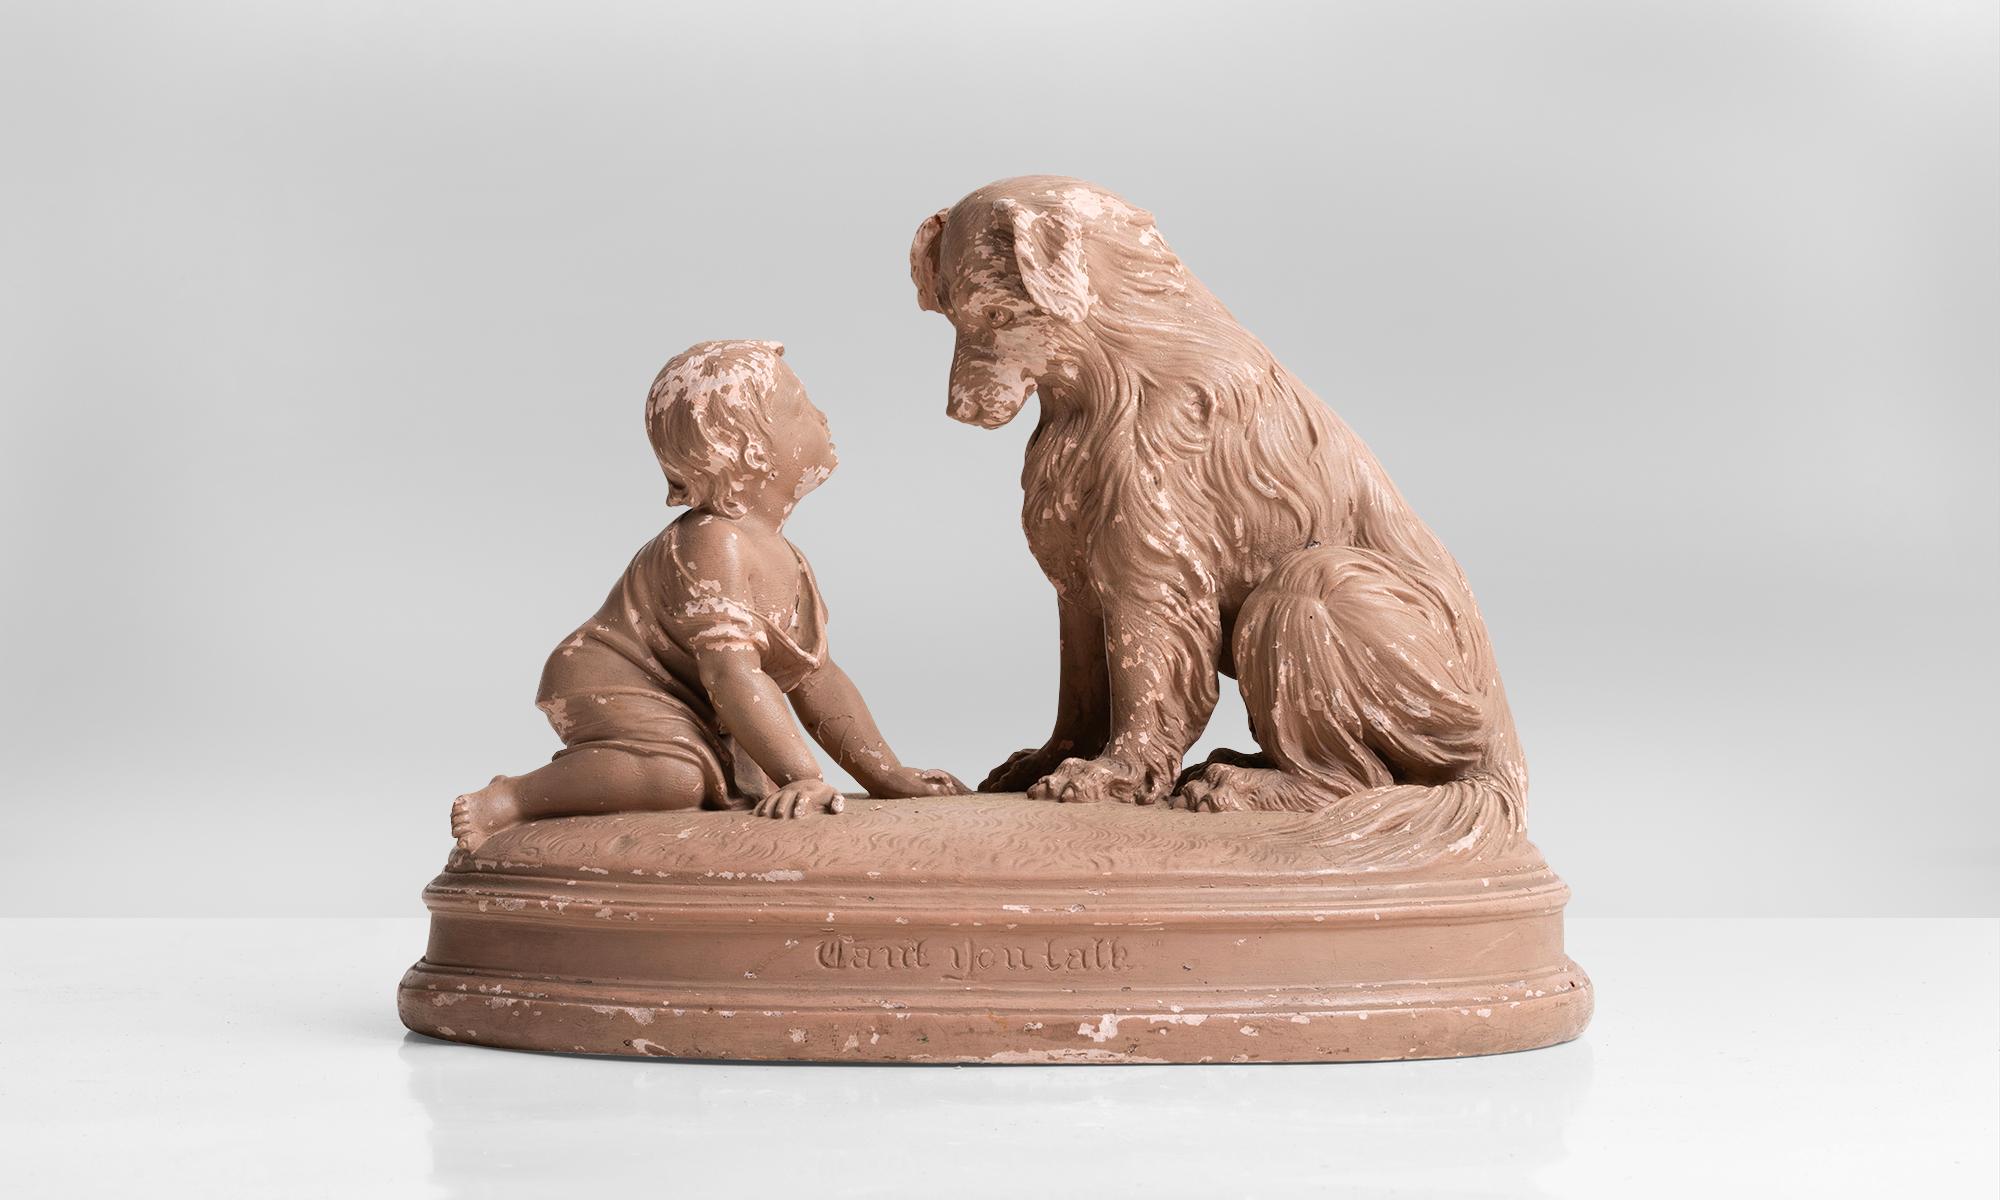 Wonderful chalkware sculpture of boy with dog, American, 20th century 

Moulded plaster of Paris with original period paint, signed R.J. Morris.

Base is inscribed with the question: 